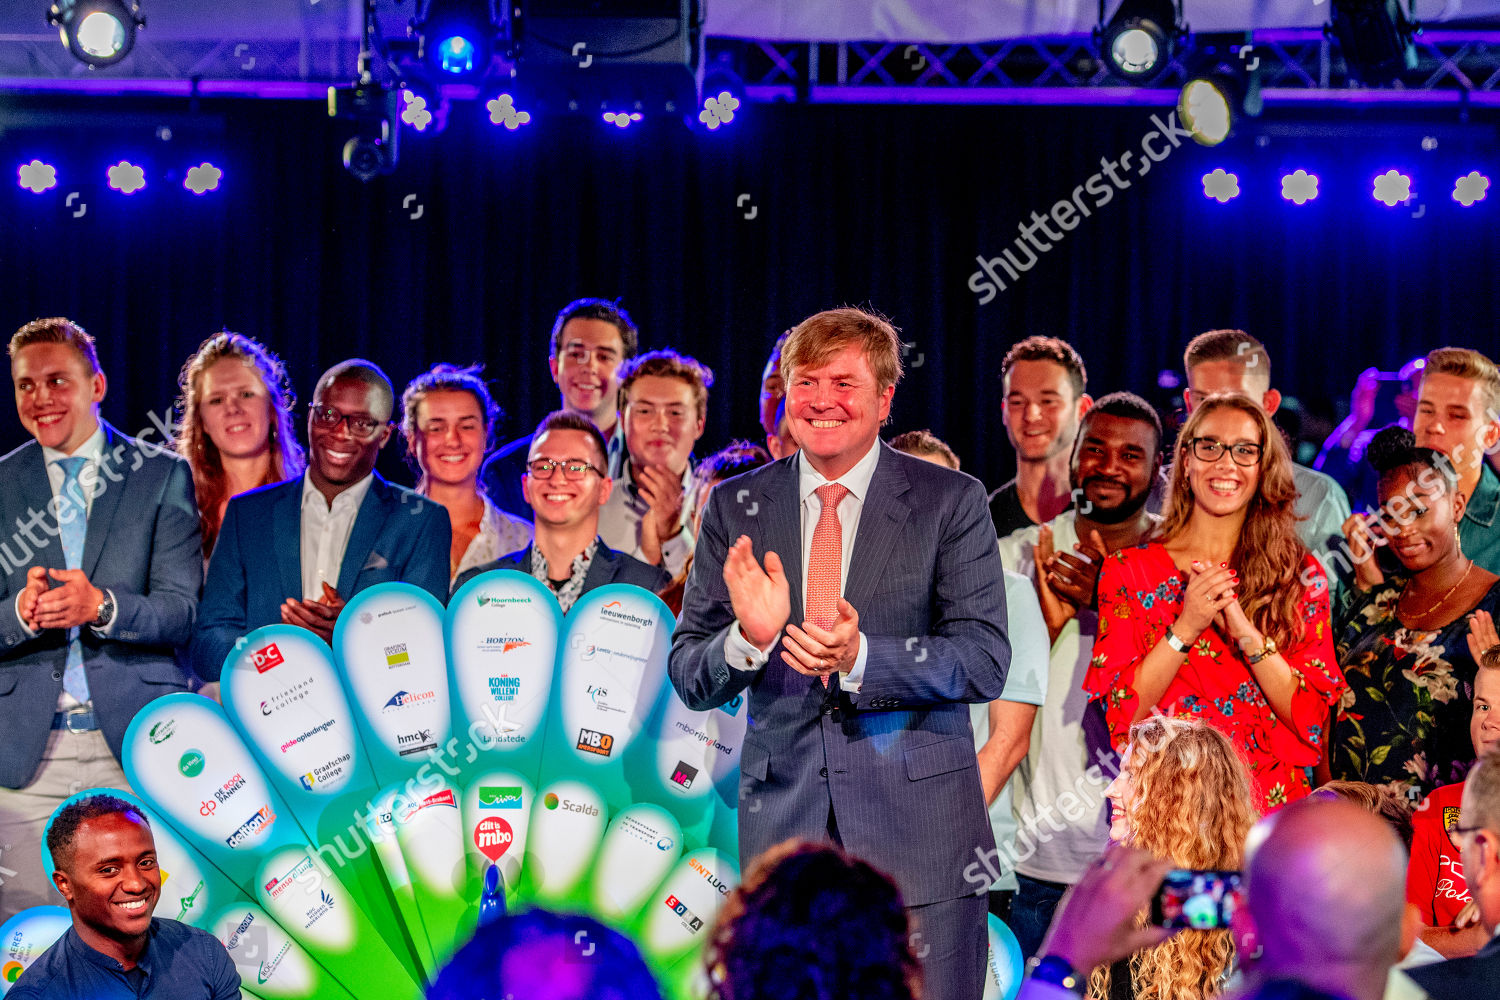 opening-of-new-academic-year-of-mbo-at-roc-tilburg-netherlands-shutterstock-editorial-9808902m.jpg